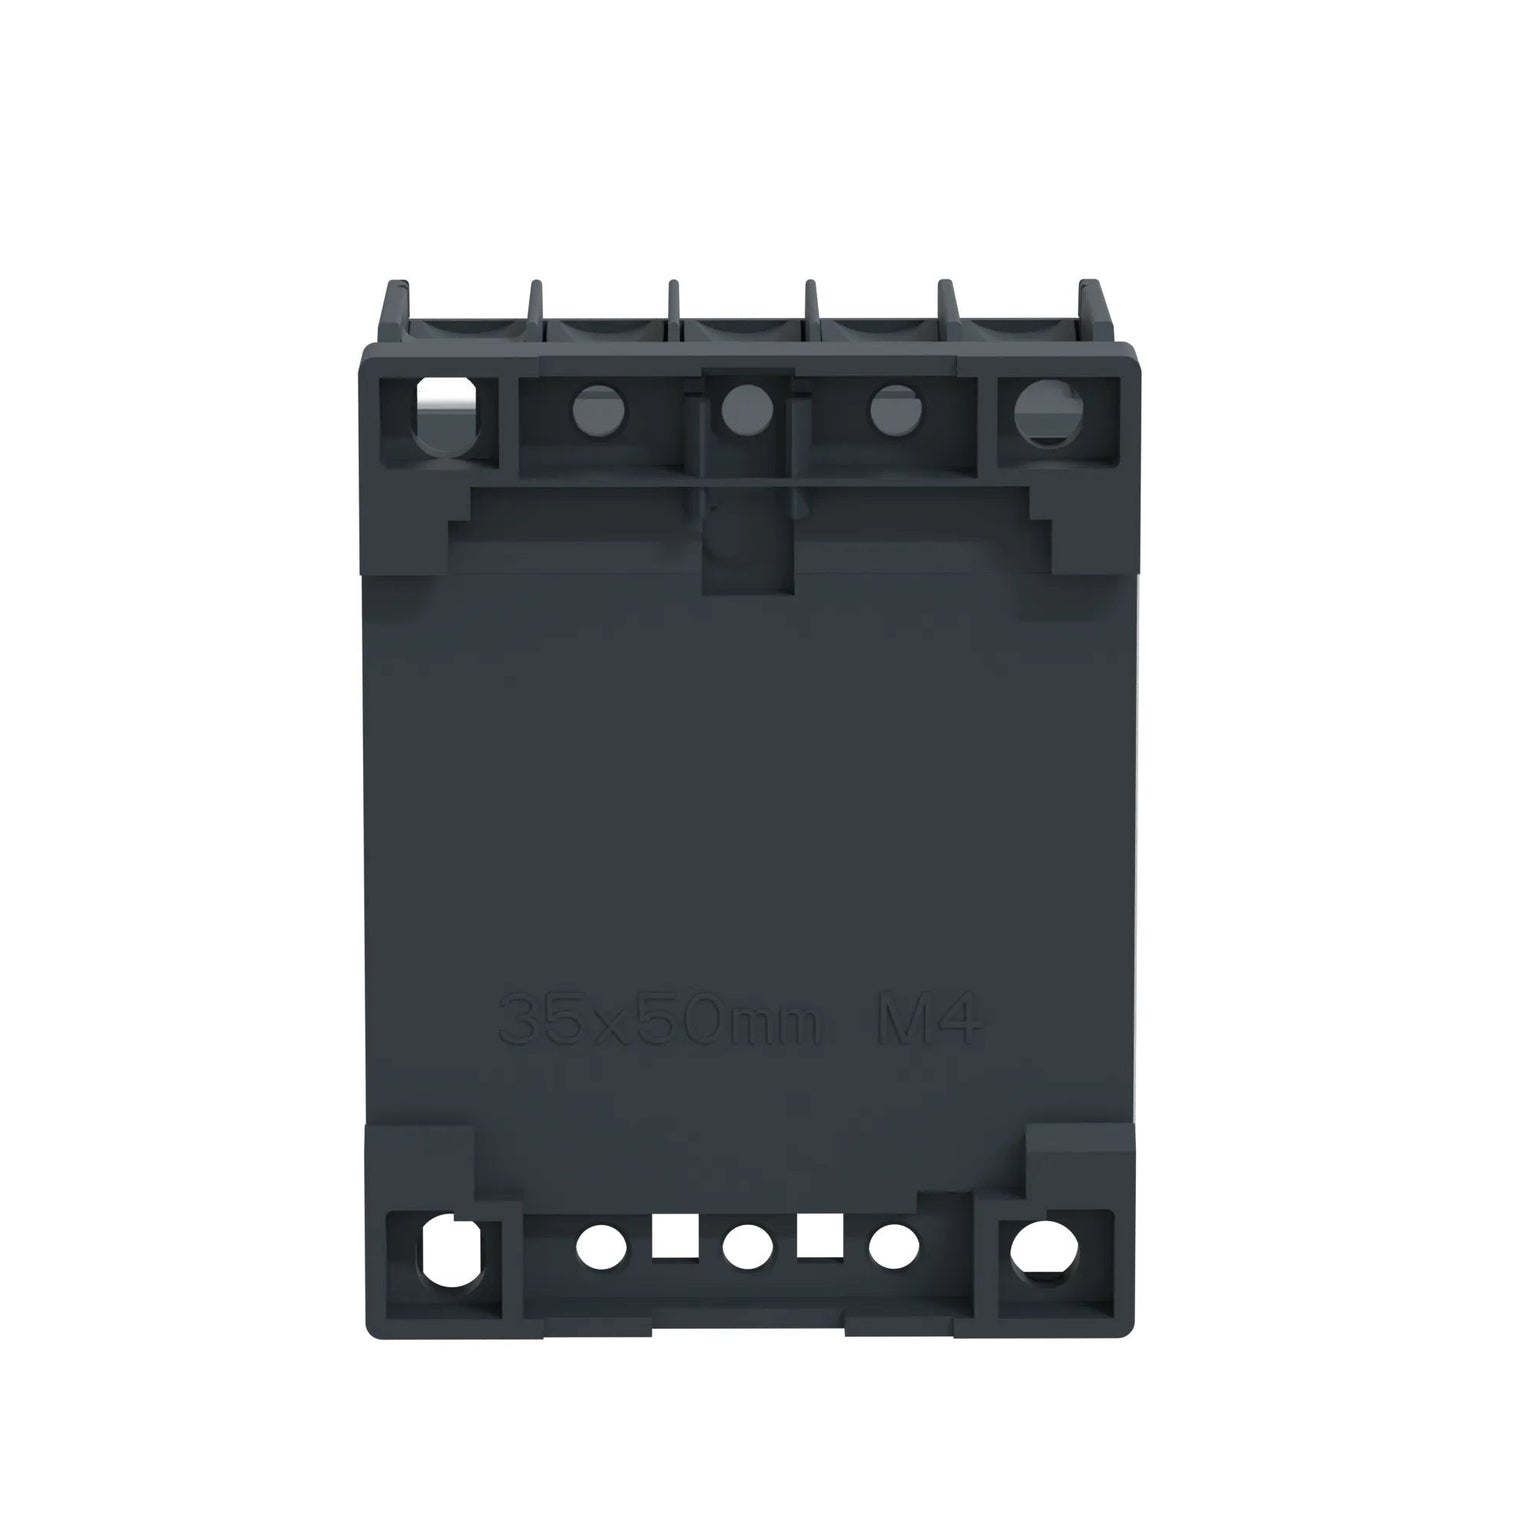 LC1K0910B7 - Square D - Contactor